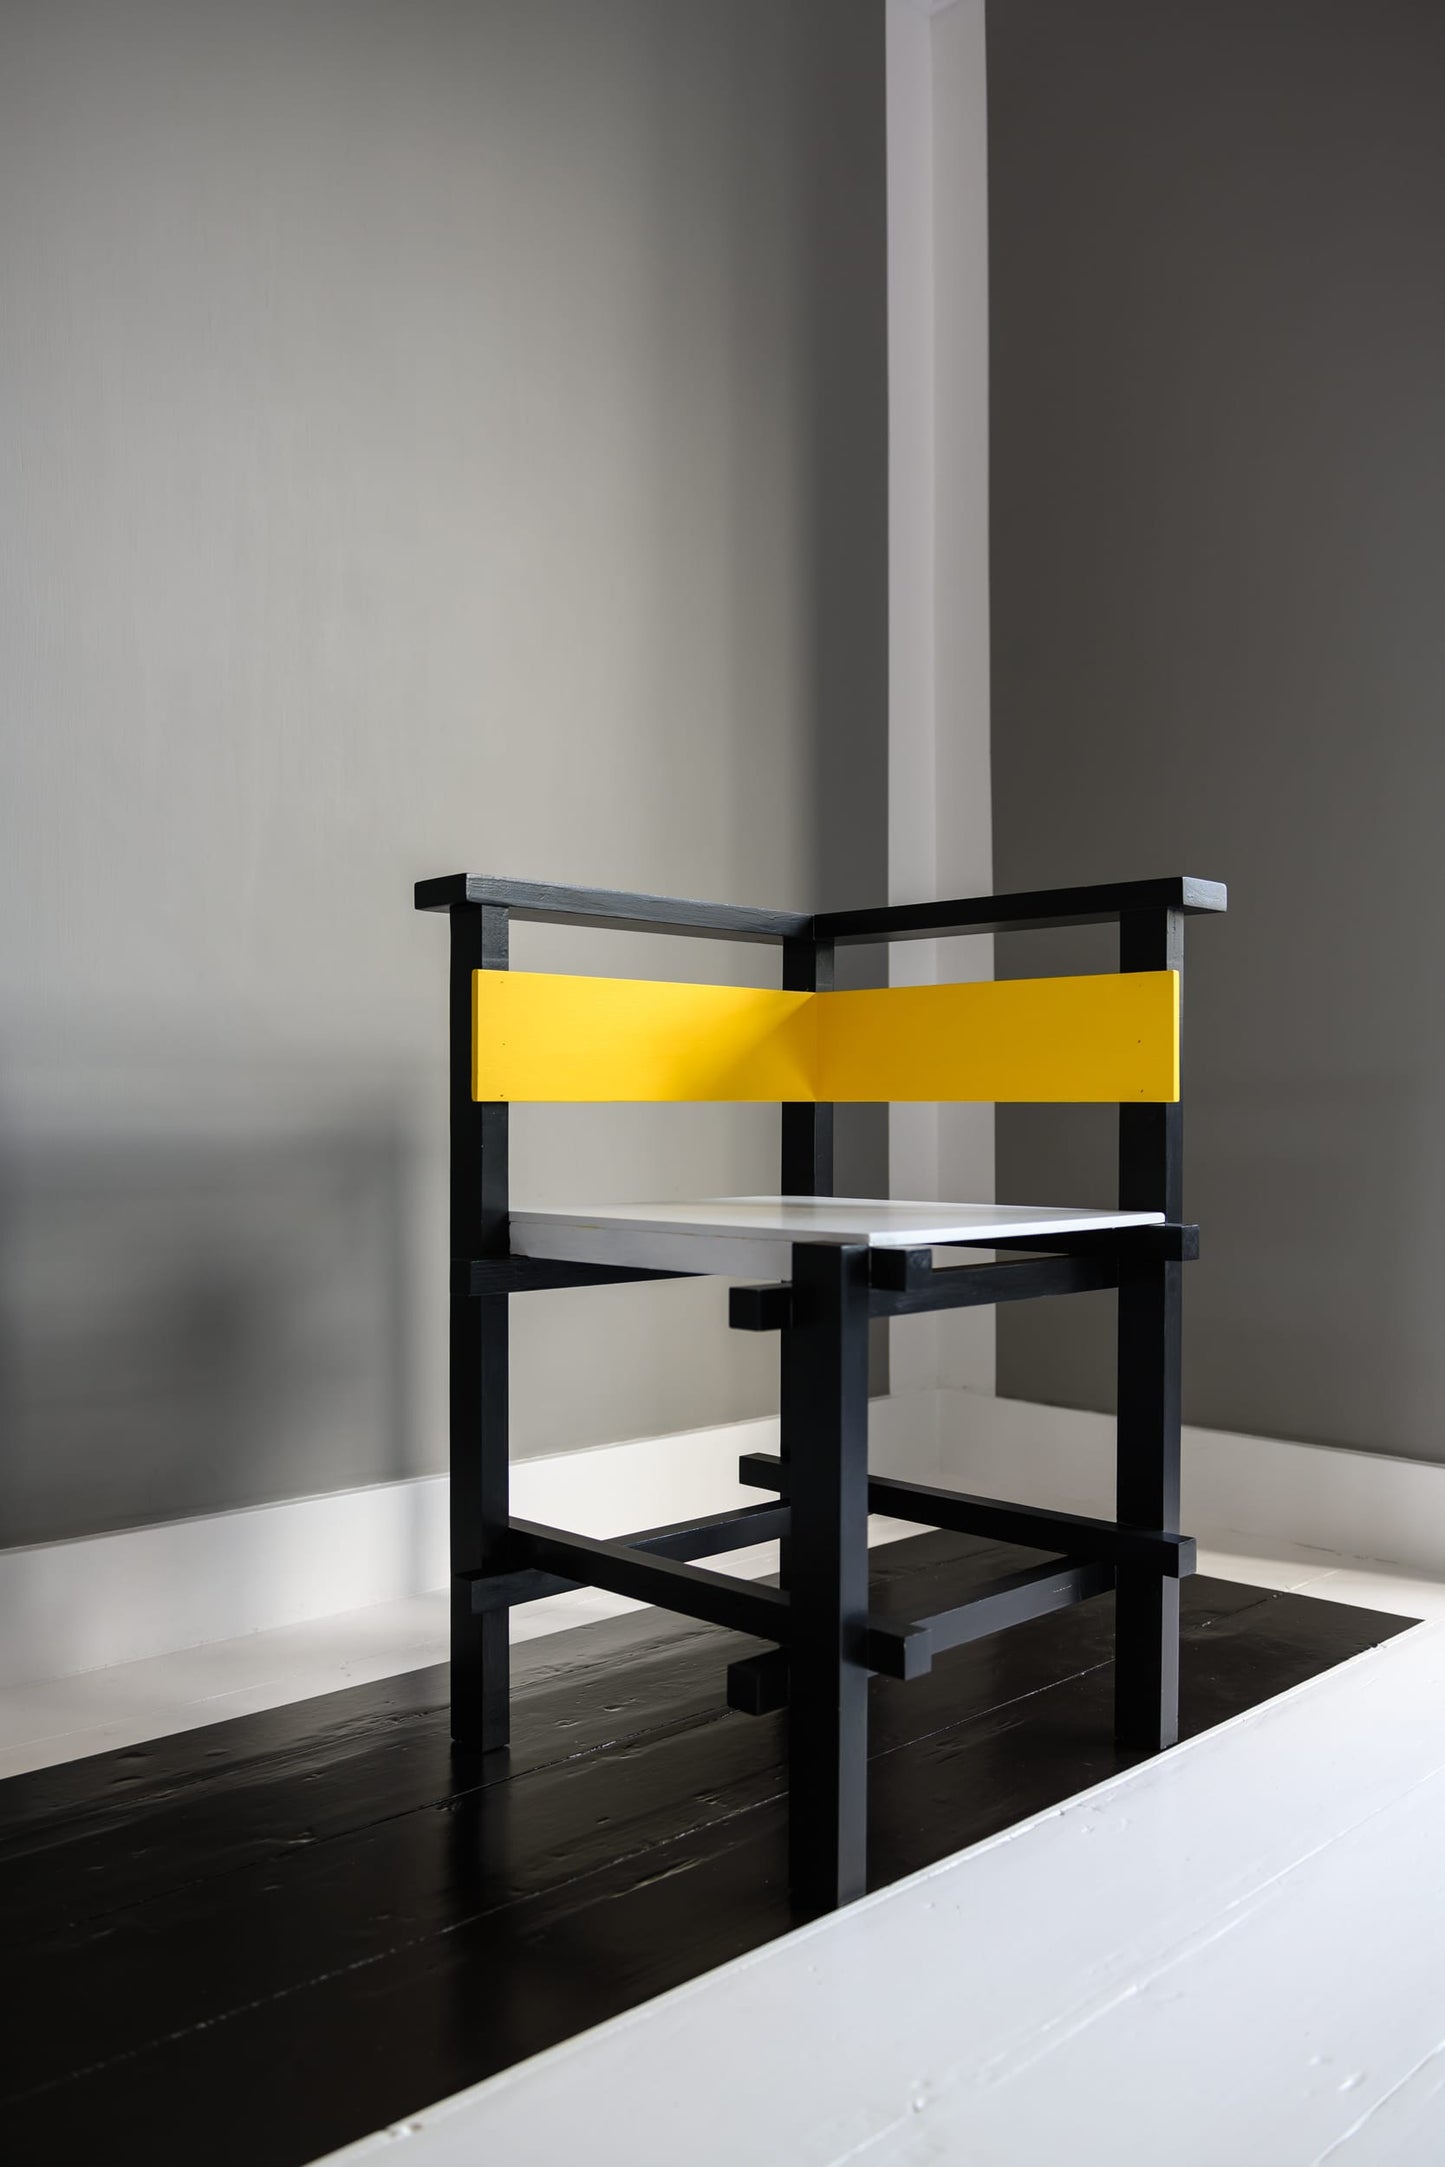 The artwork 'Van Doesburg-Rinsemahuis #5' by J.T. Hof displaying a lonely black and yellow chair in a corner